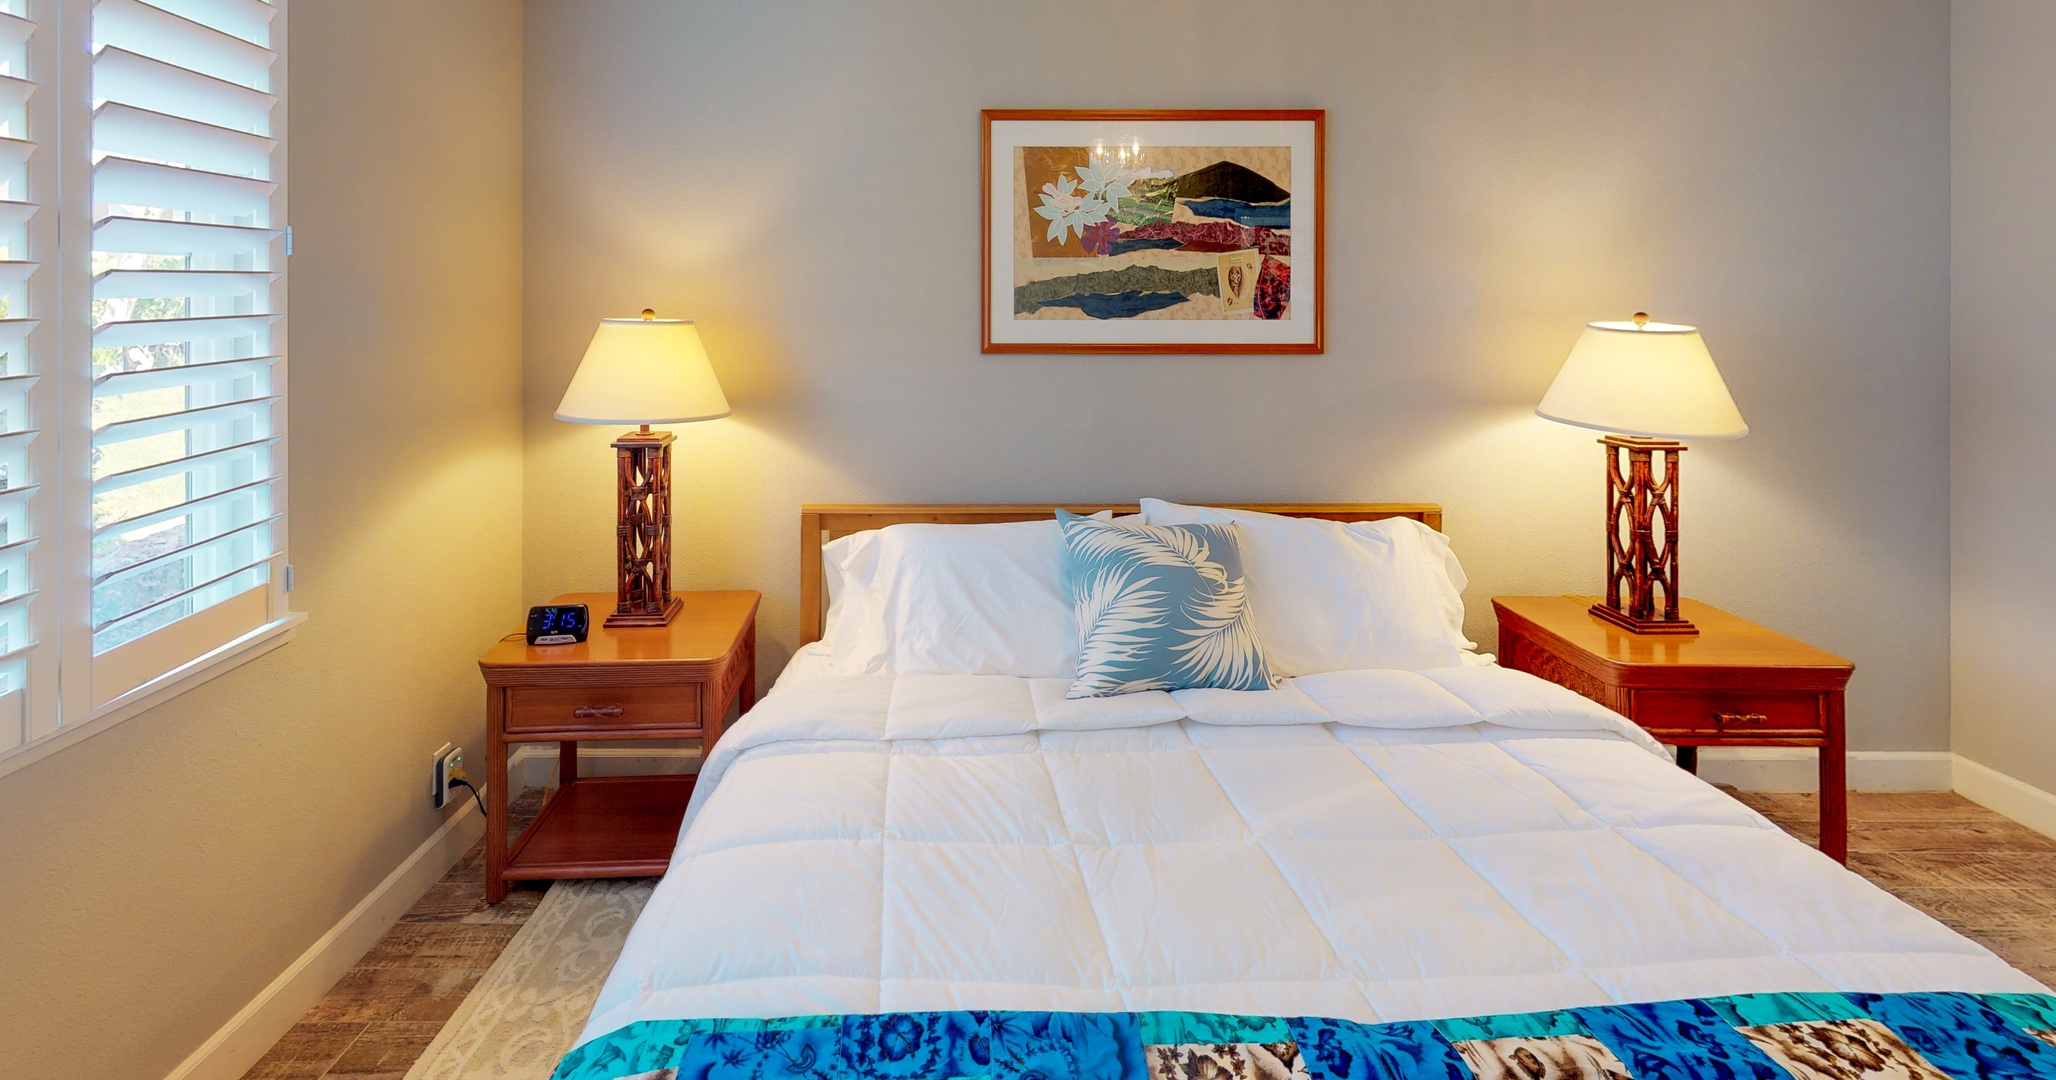 Kapolei Vacation Rentals, Ko Olina Kai 1051A - The primary guest bedroom with a framed artistry and soft linens.